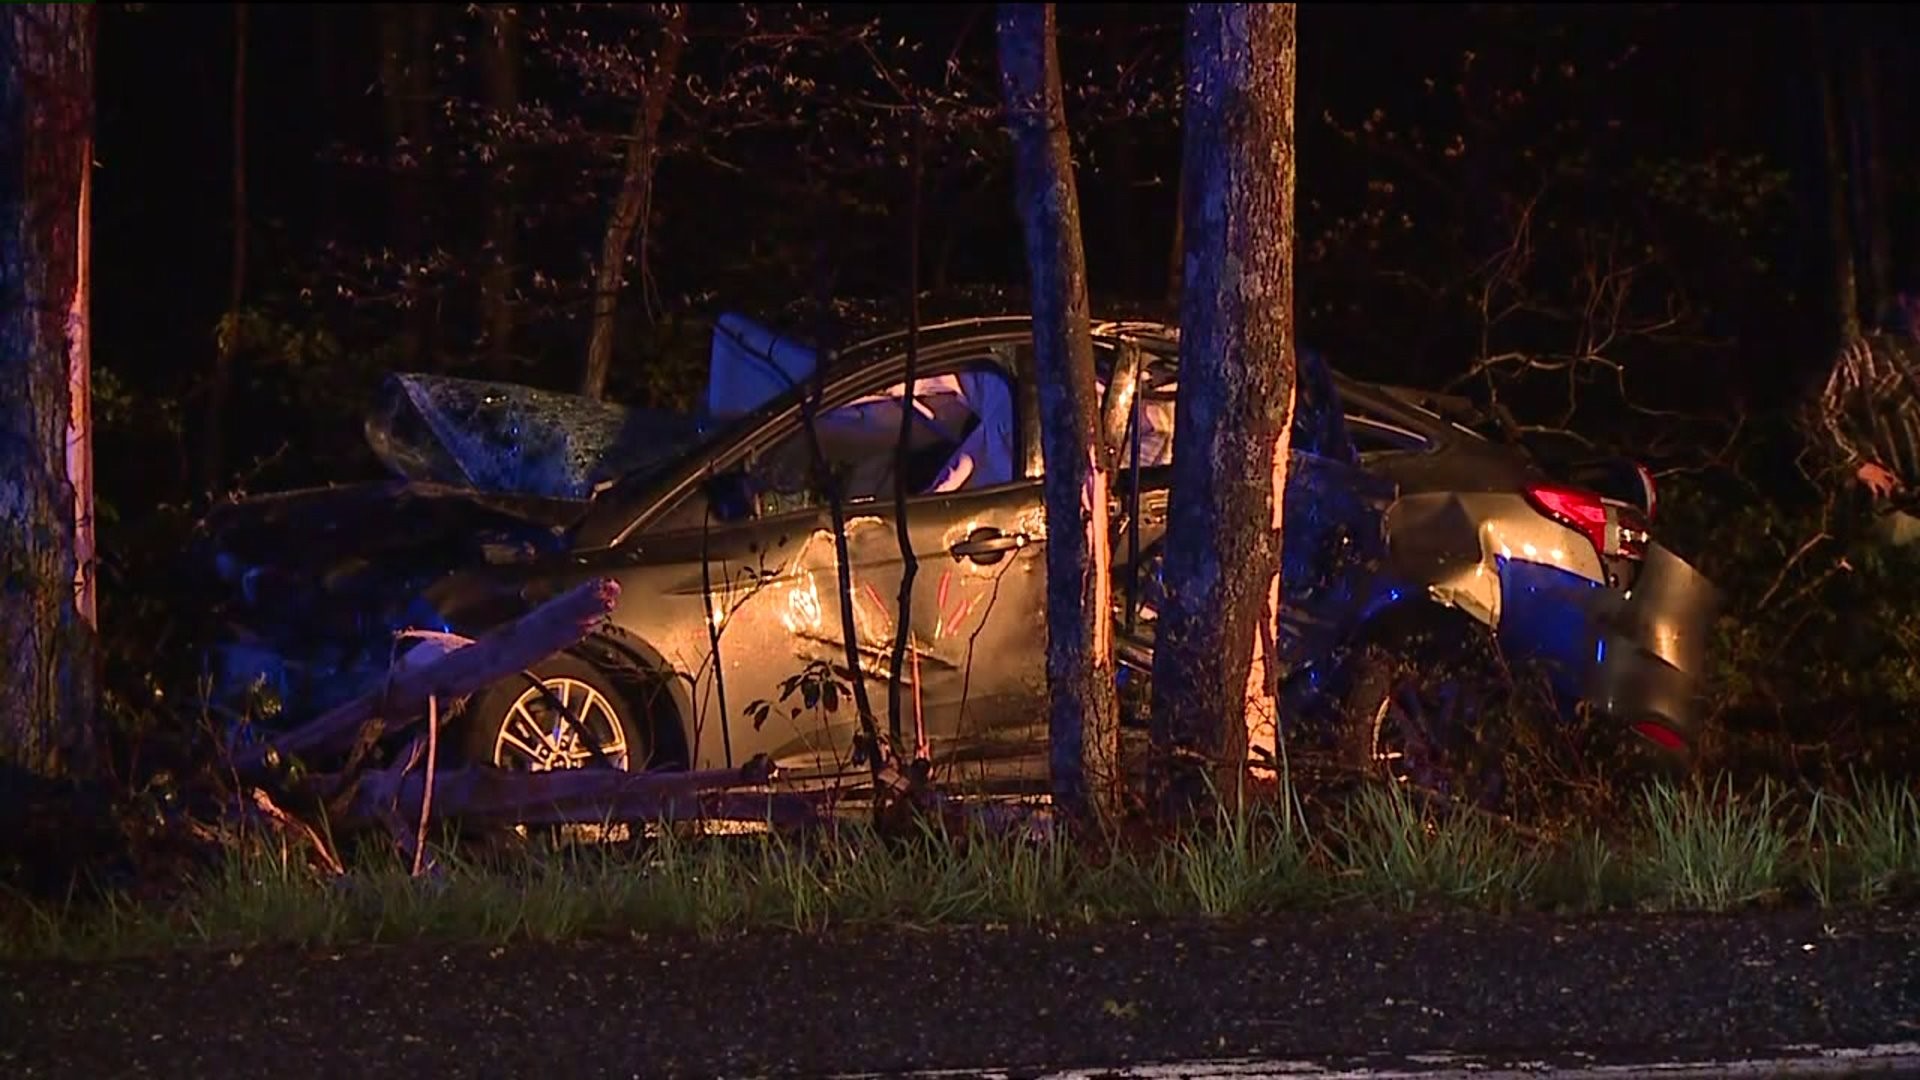 Woman Taken to Hospital After Crash in Luzerne County